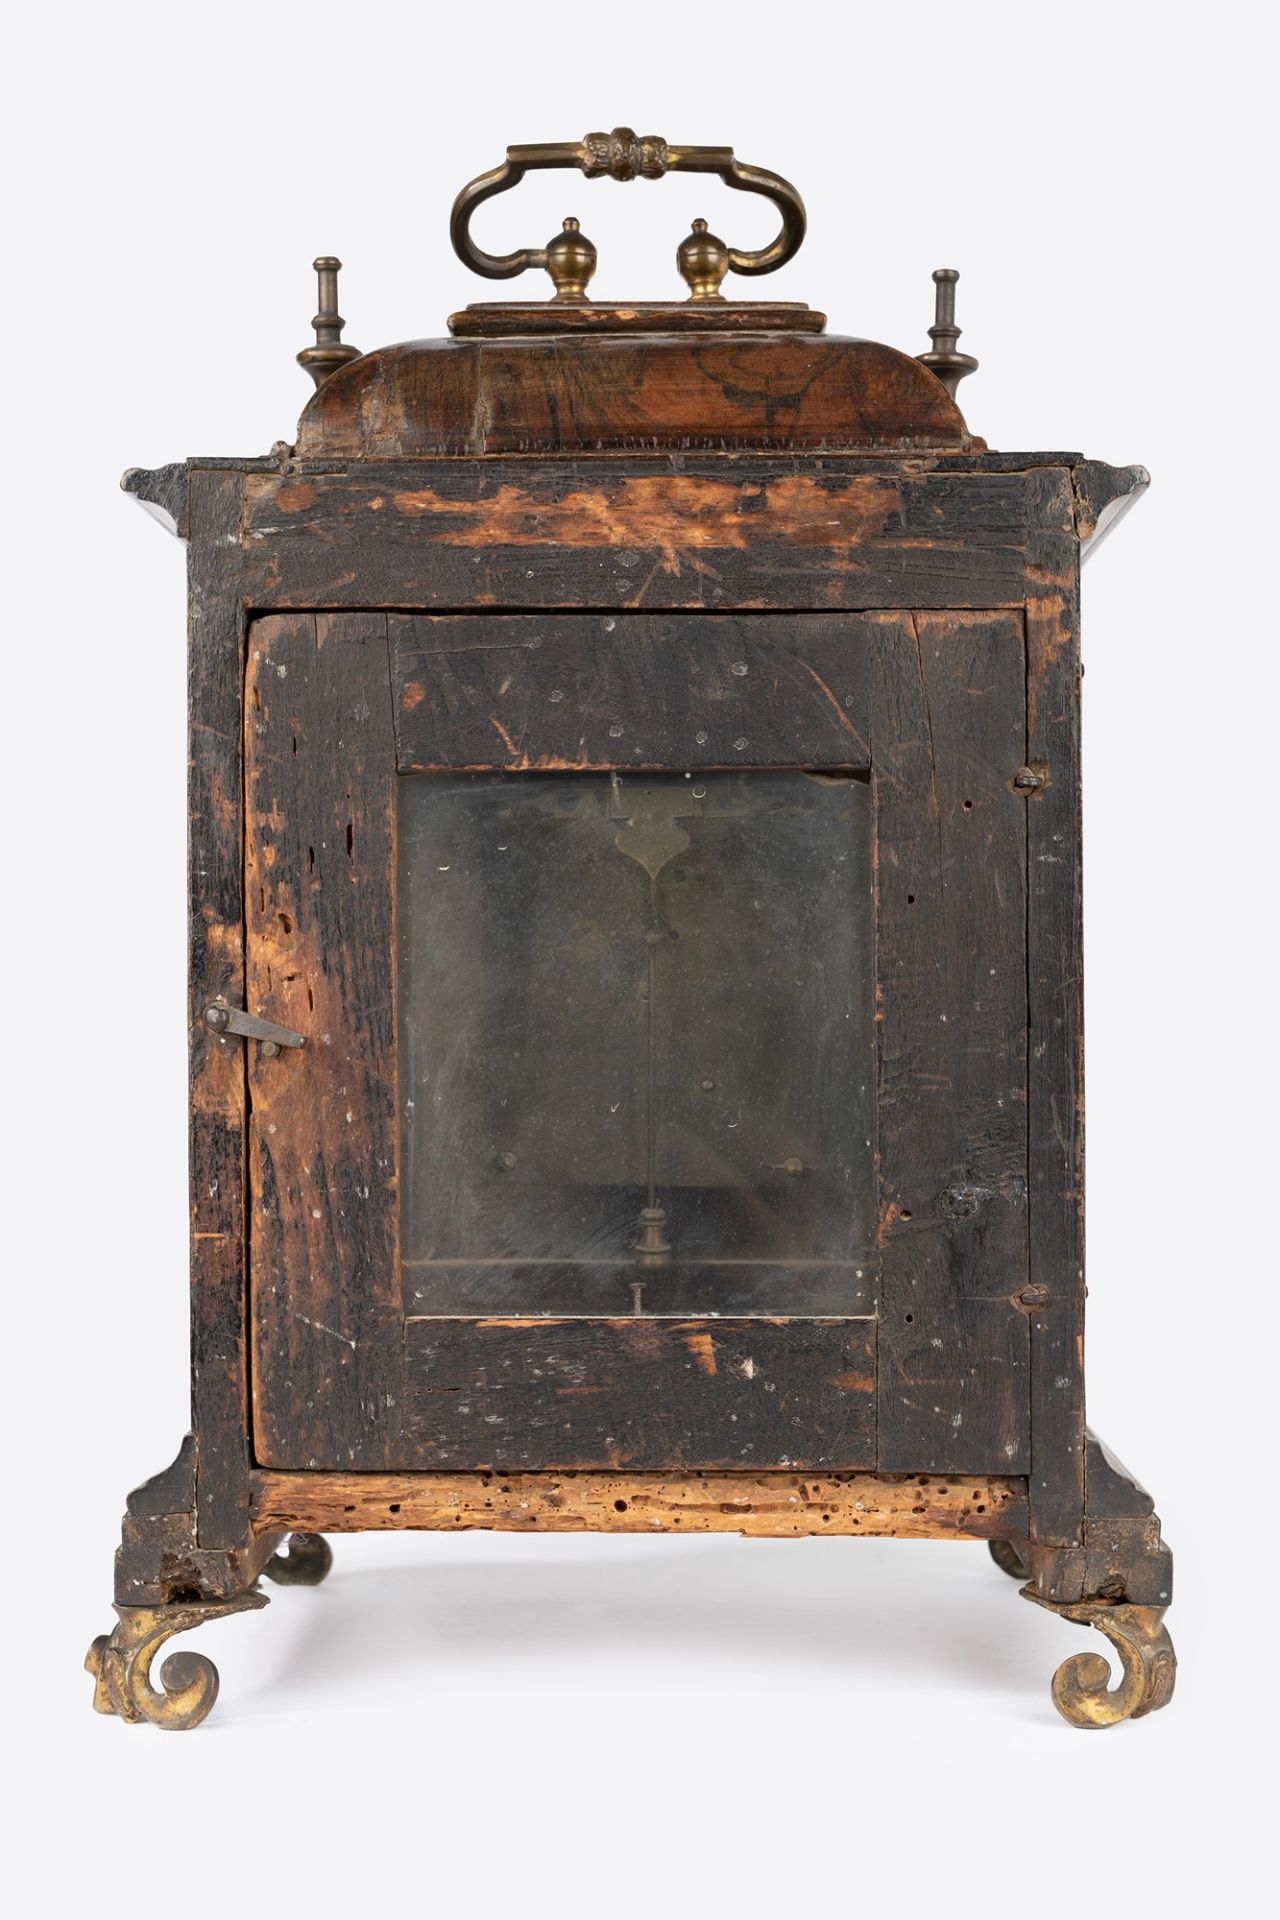 Table clock in wood and bronze, 18th century - Image 3 of 8